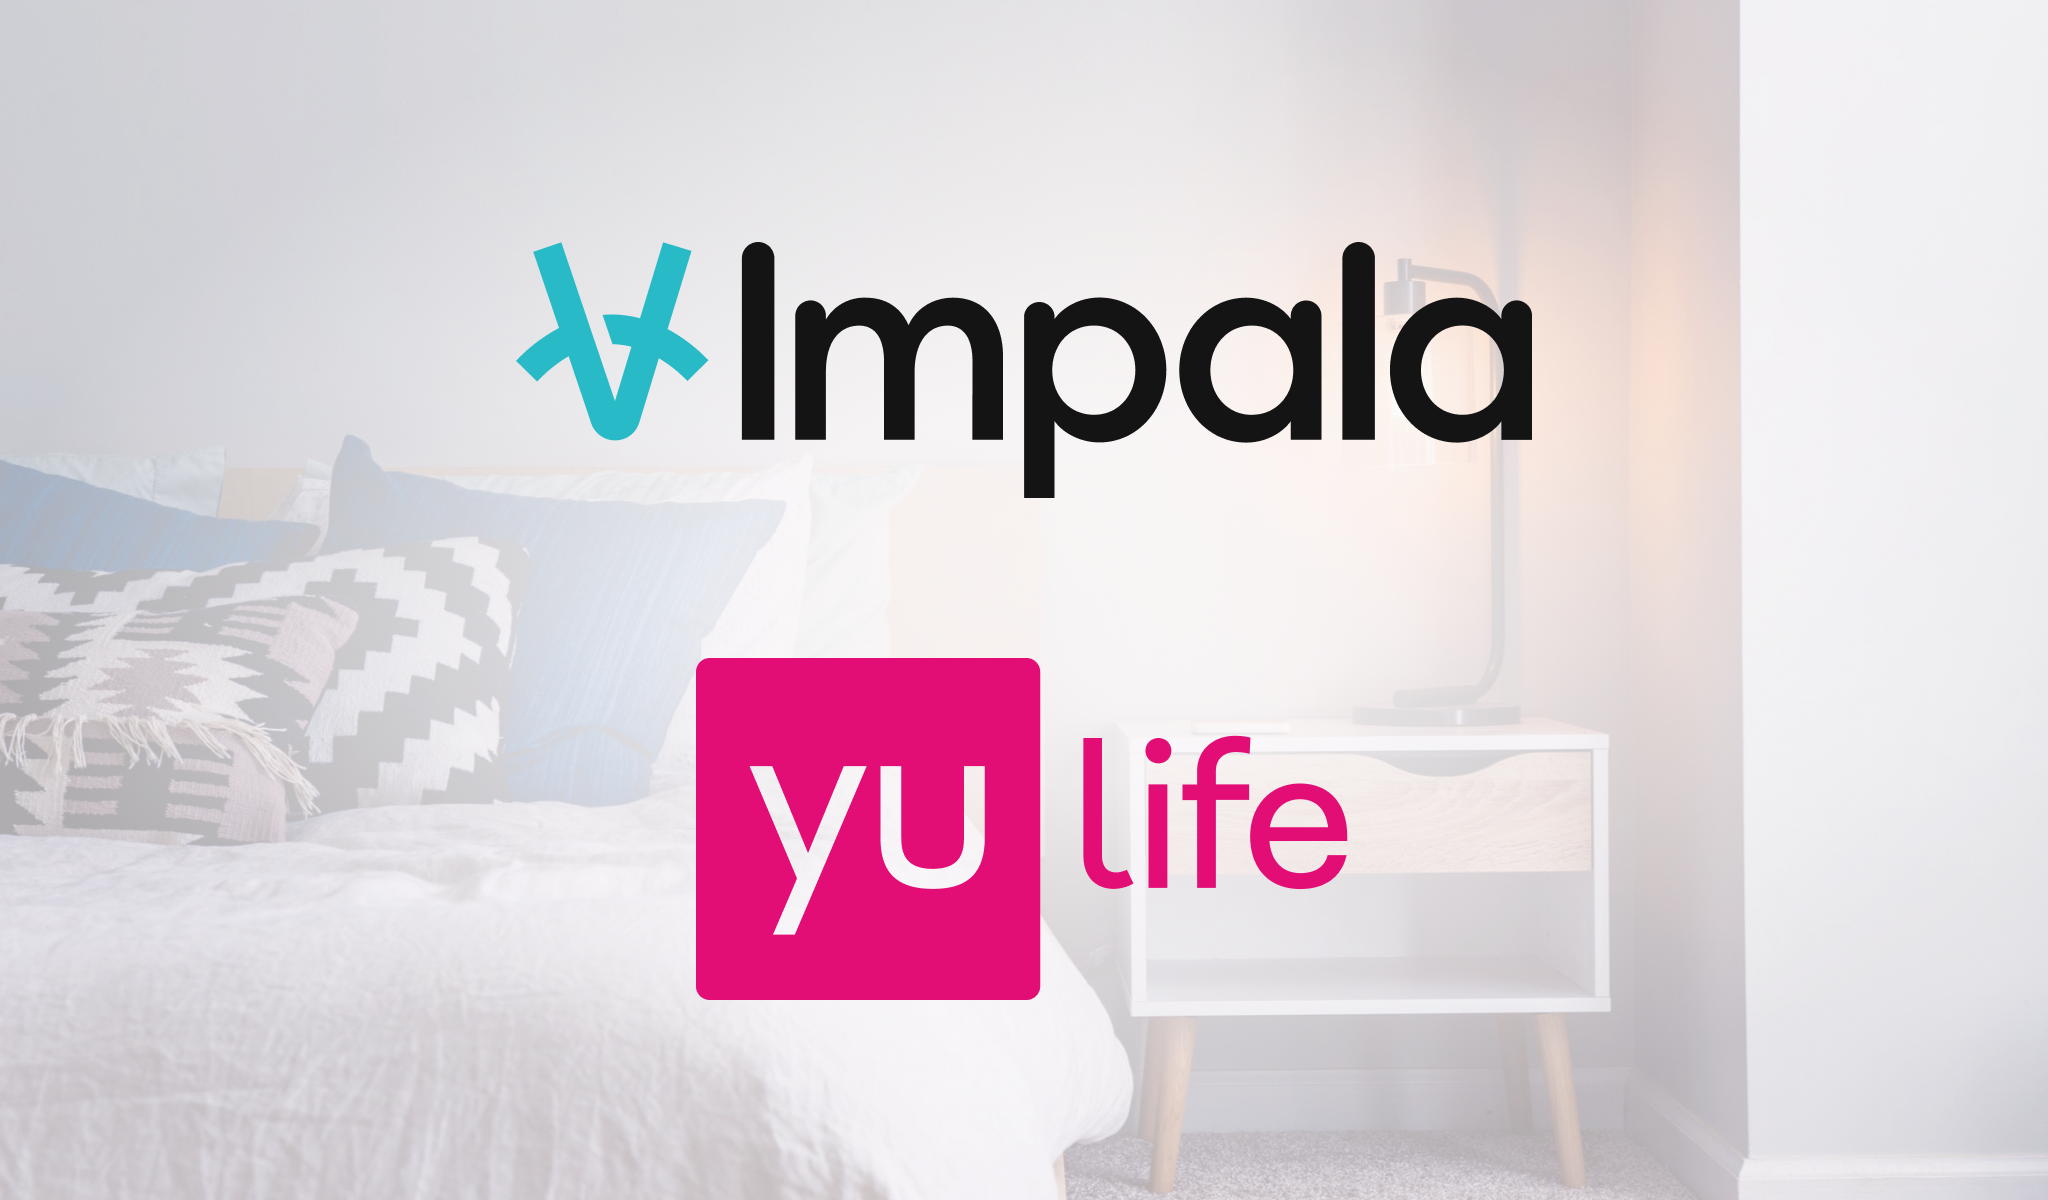 The logos of Impala and YuLife superimposed on a hotel room